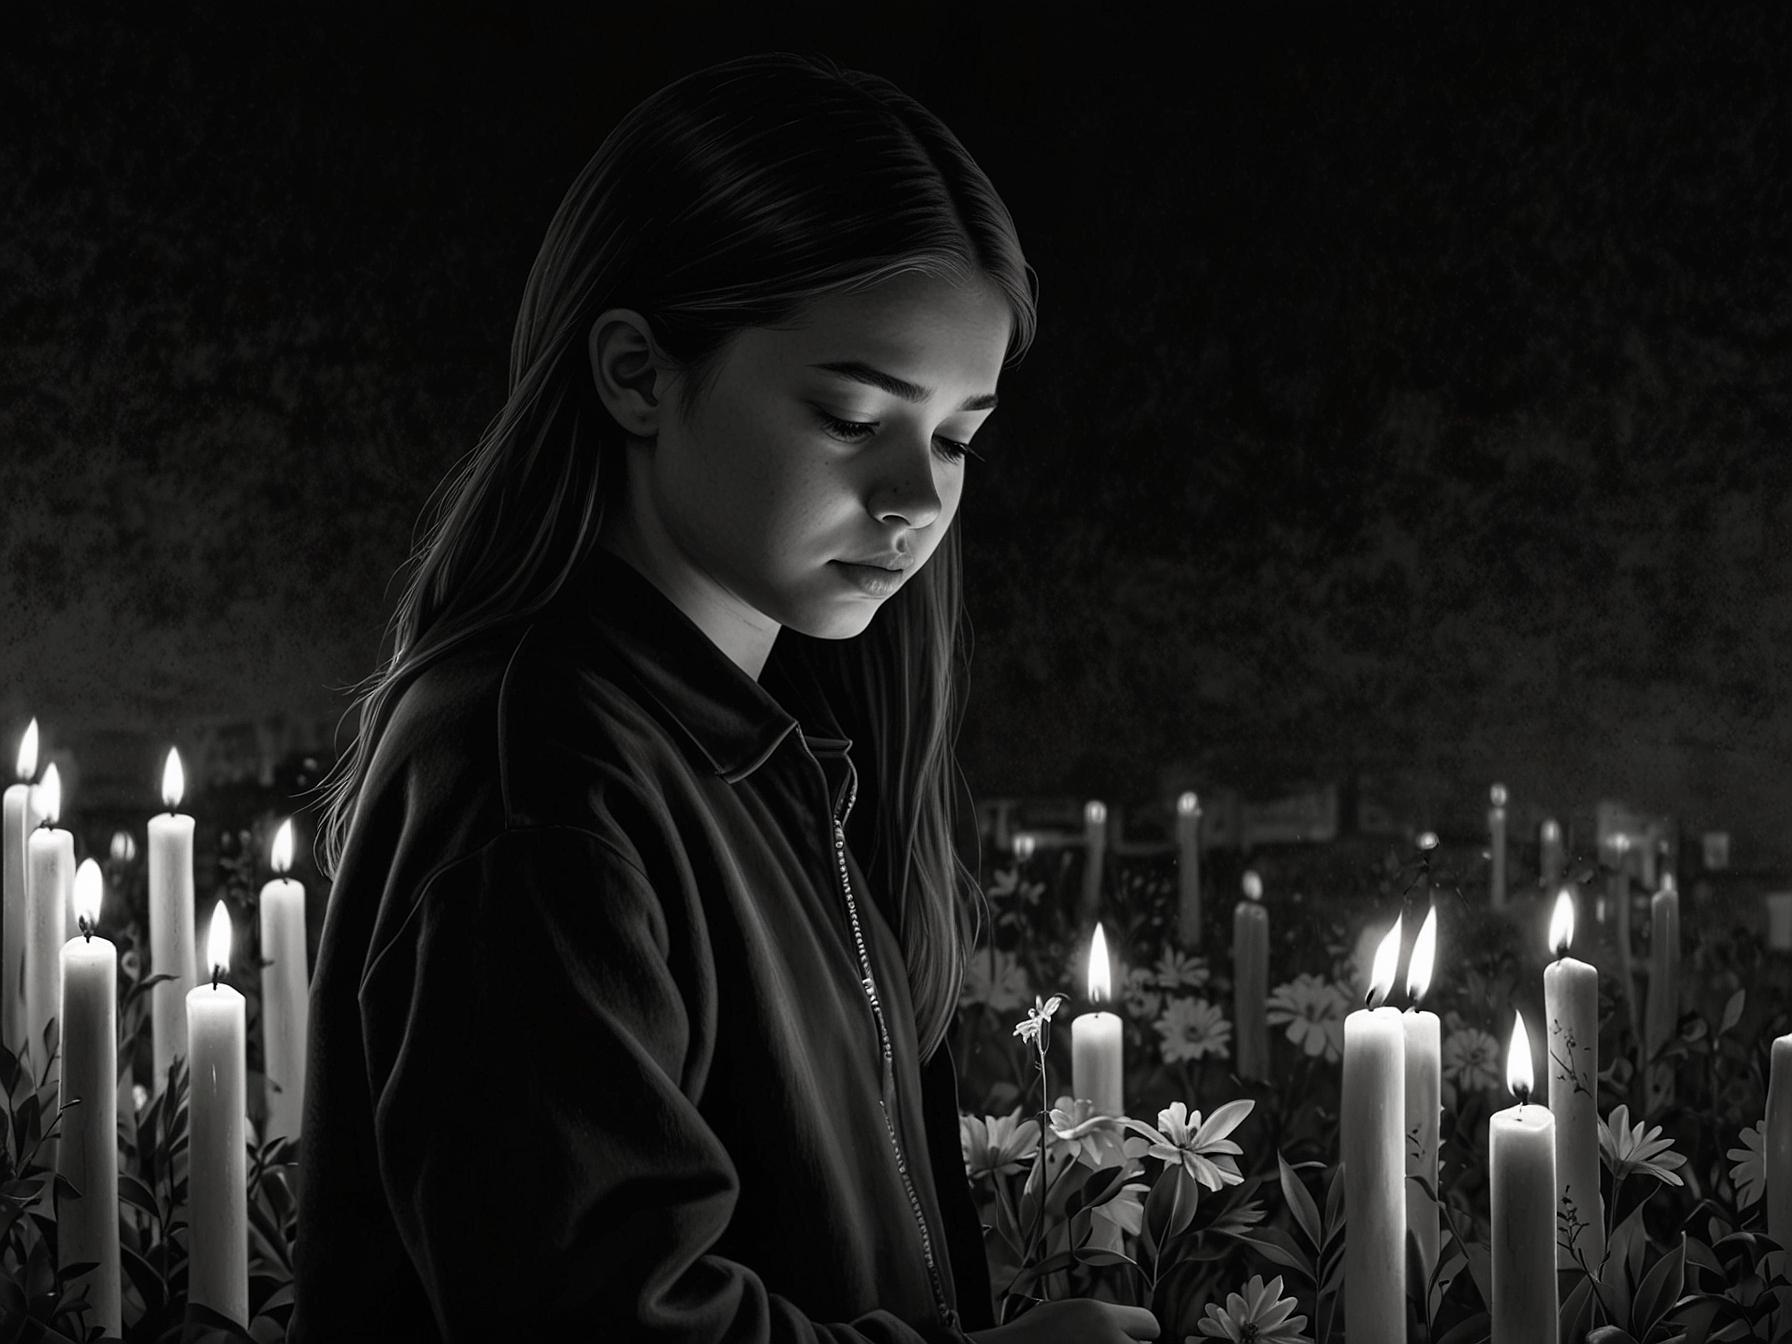 A somber image of Jocelyn Nungaray, a 12-year-old girl whose tragic death touched many, accompanied by candles and flowers placed in her memory, reflecting the immense sorrow felt by her community.